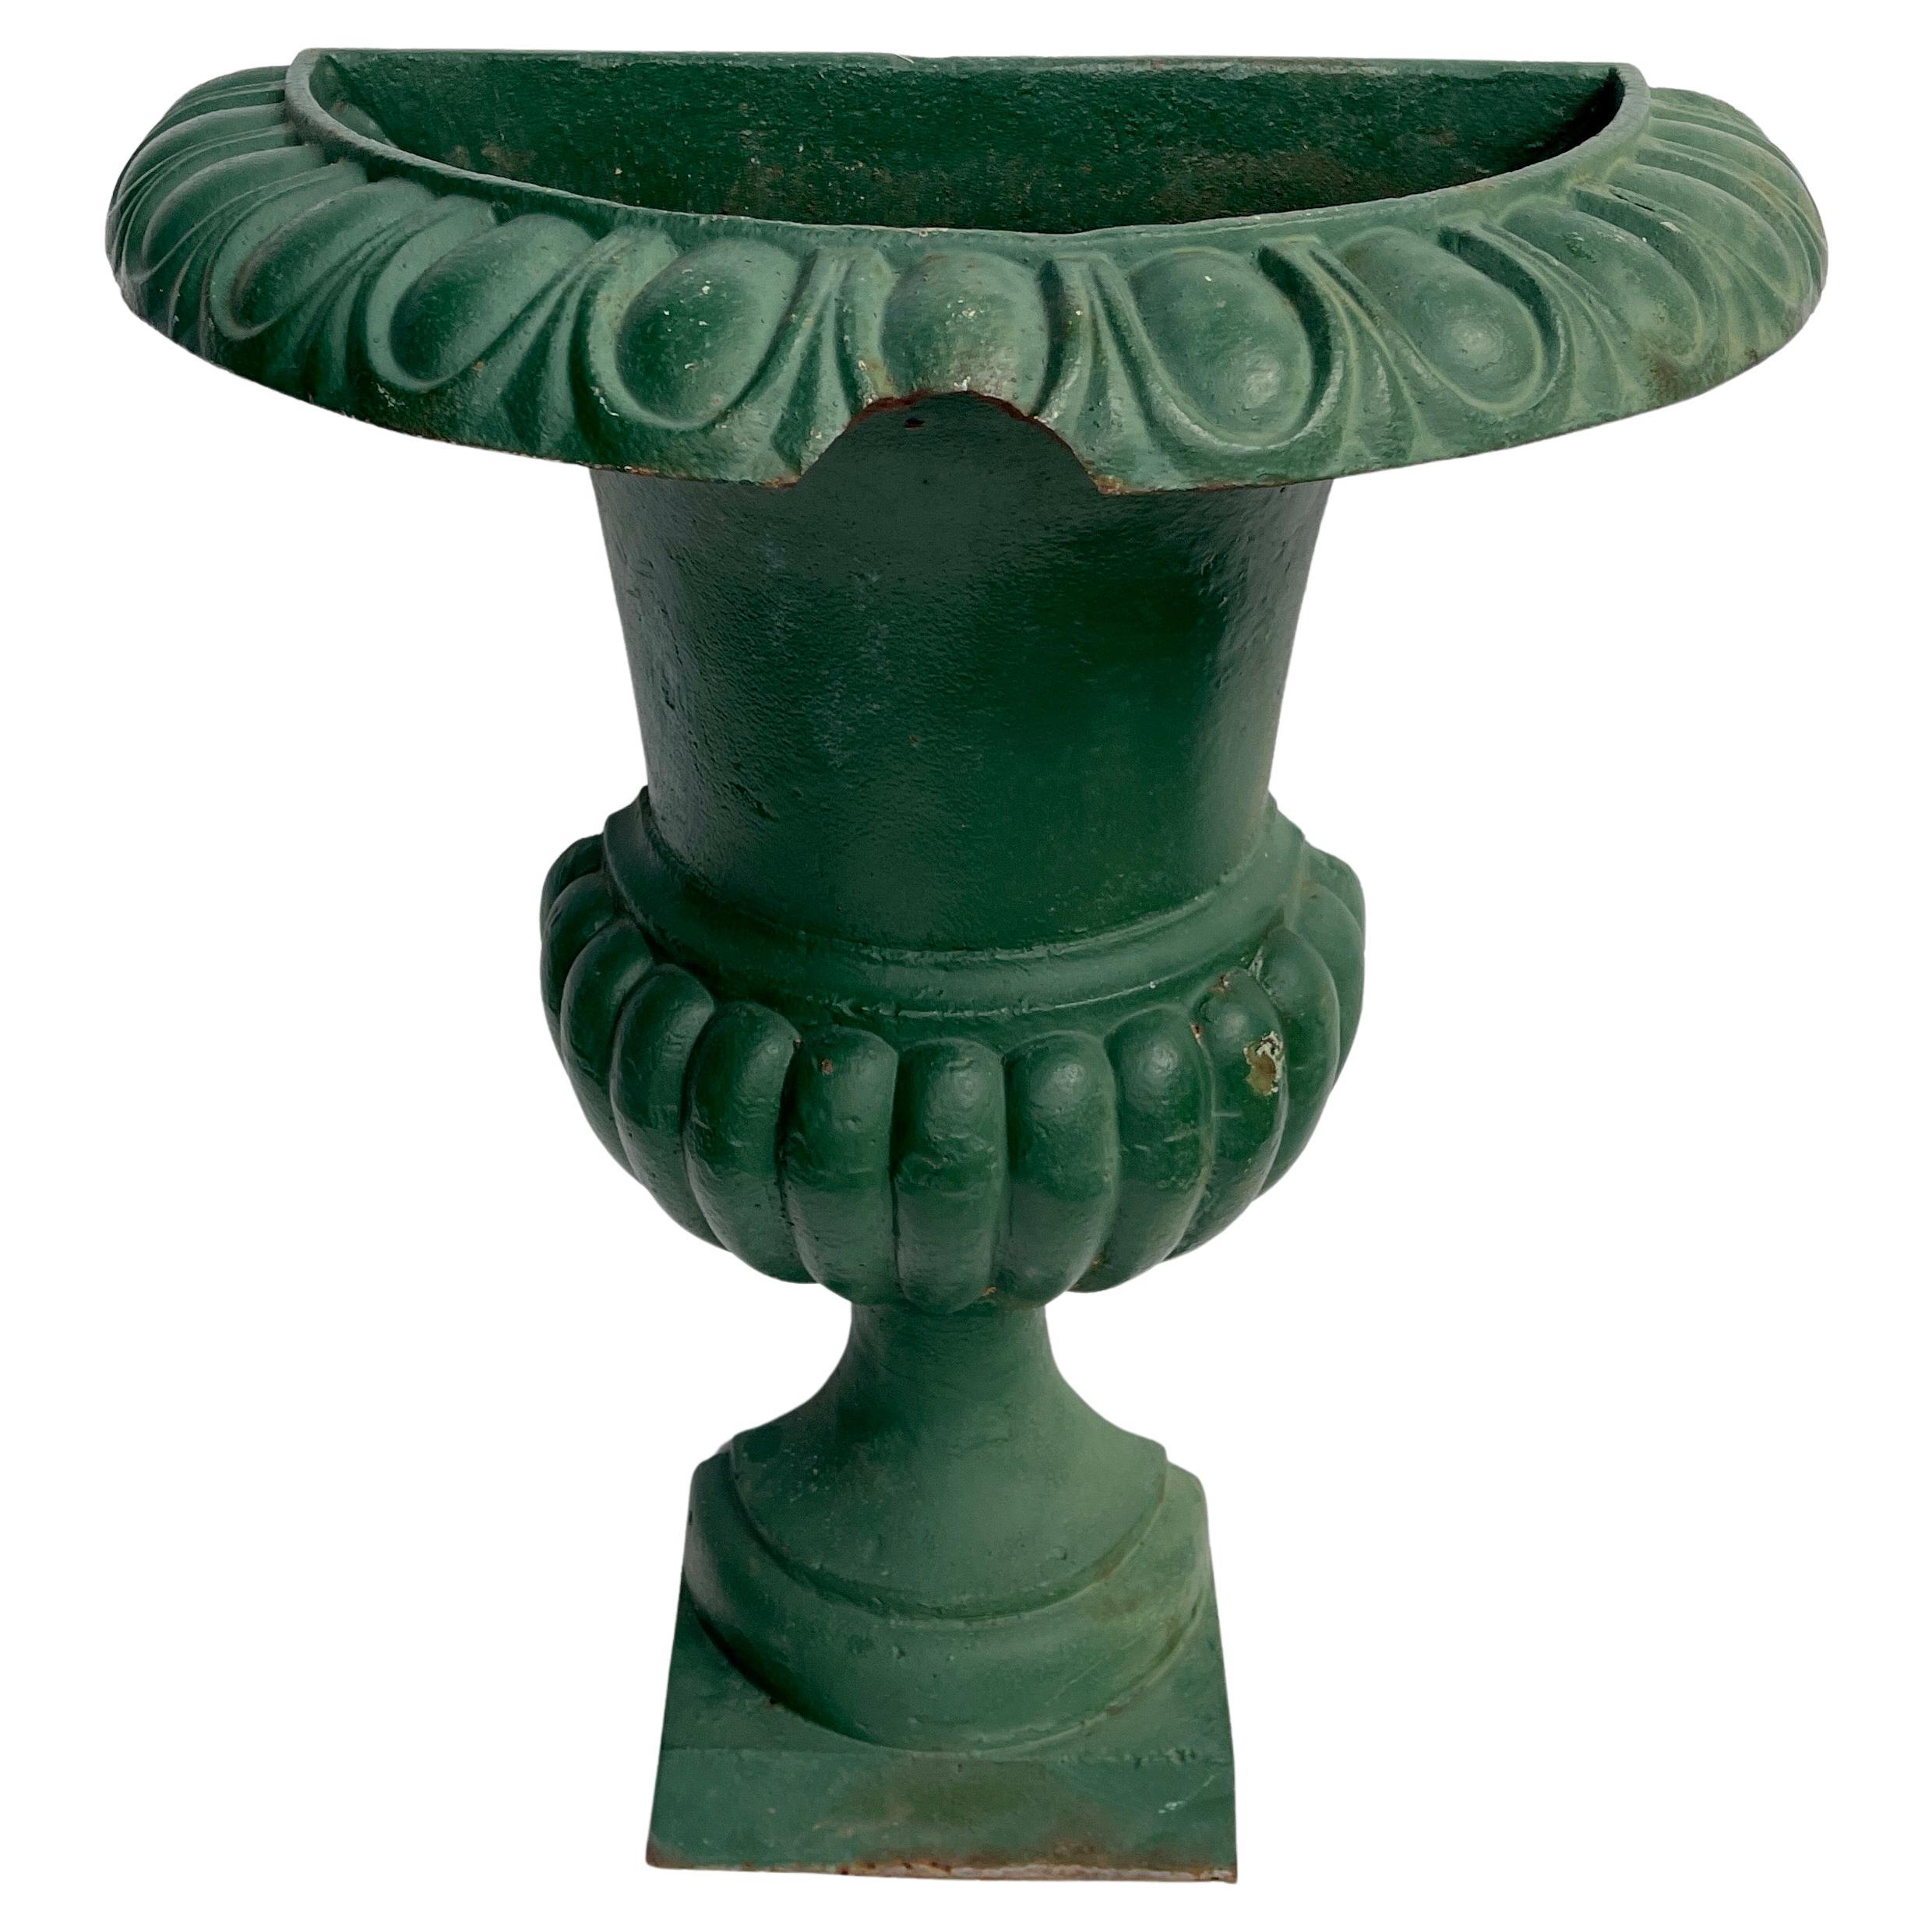 French Demi Lune Green Patina Fluted Planter Pedestal

Charming and substantial early 20th Century antique French cast iron half round wall planter. This rare piece appears to have been repainted many years ago in a wonderful shade of green. The